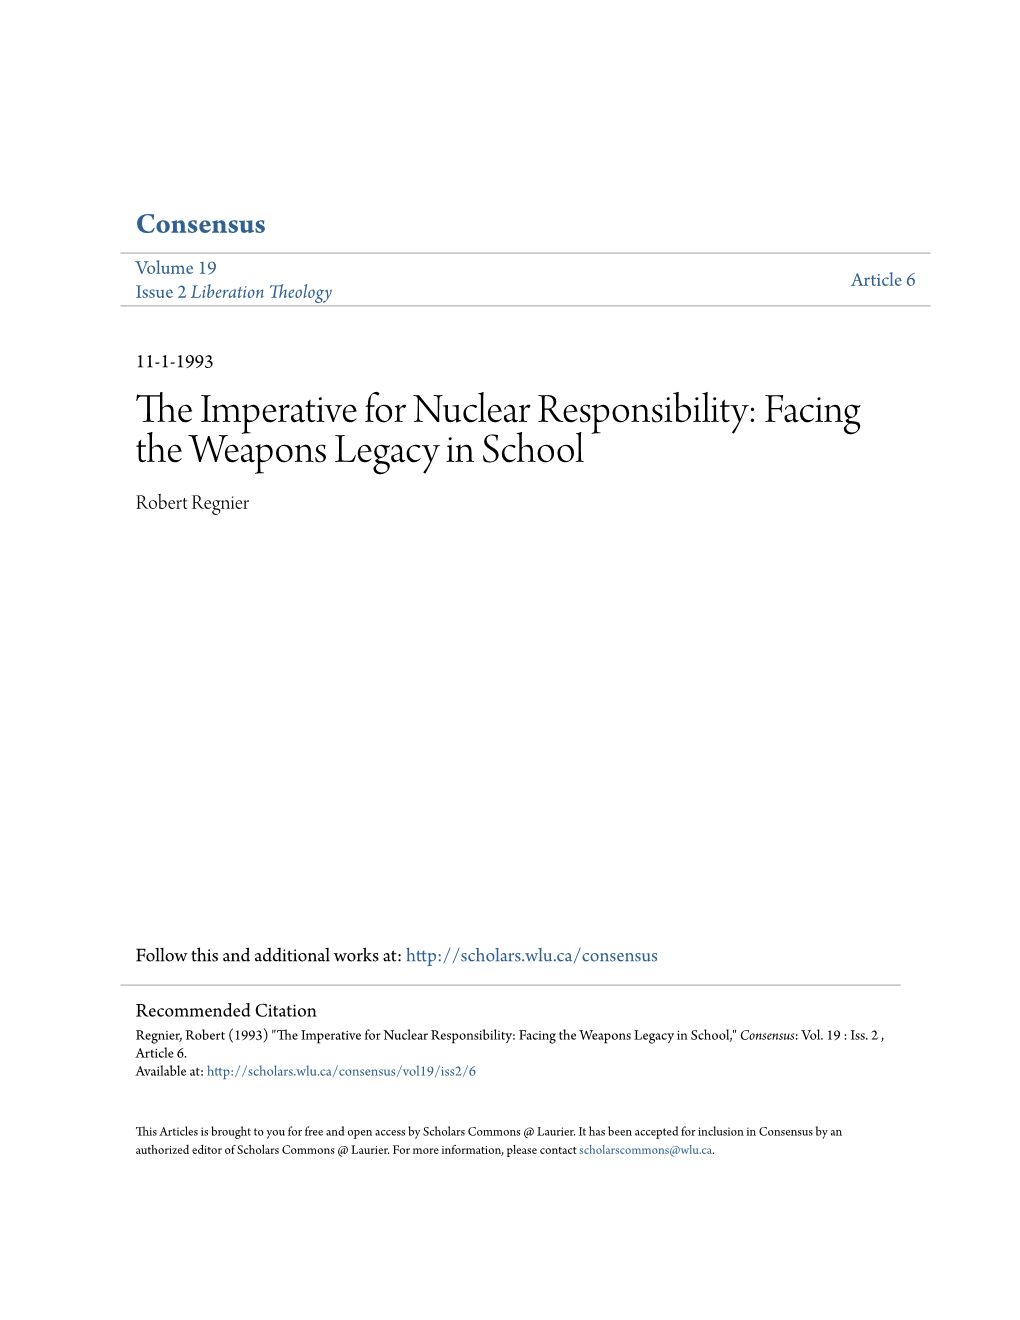 The Imperative for Nuclear Responsibility: Facing the Weapons Legacy in School